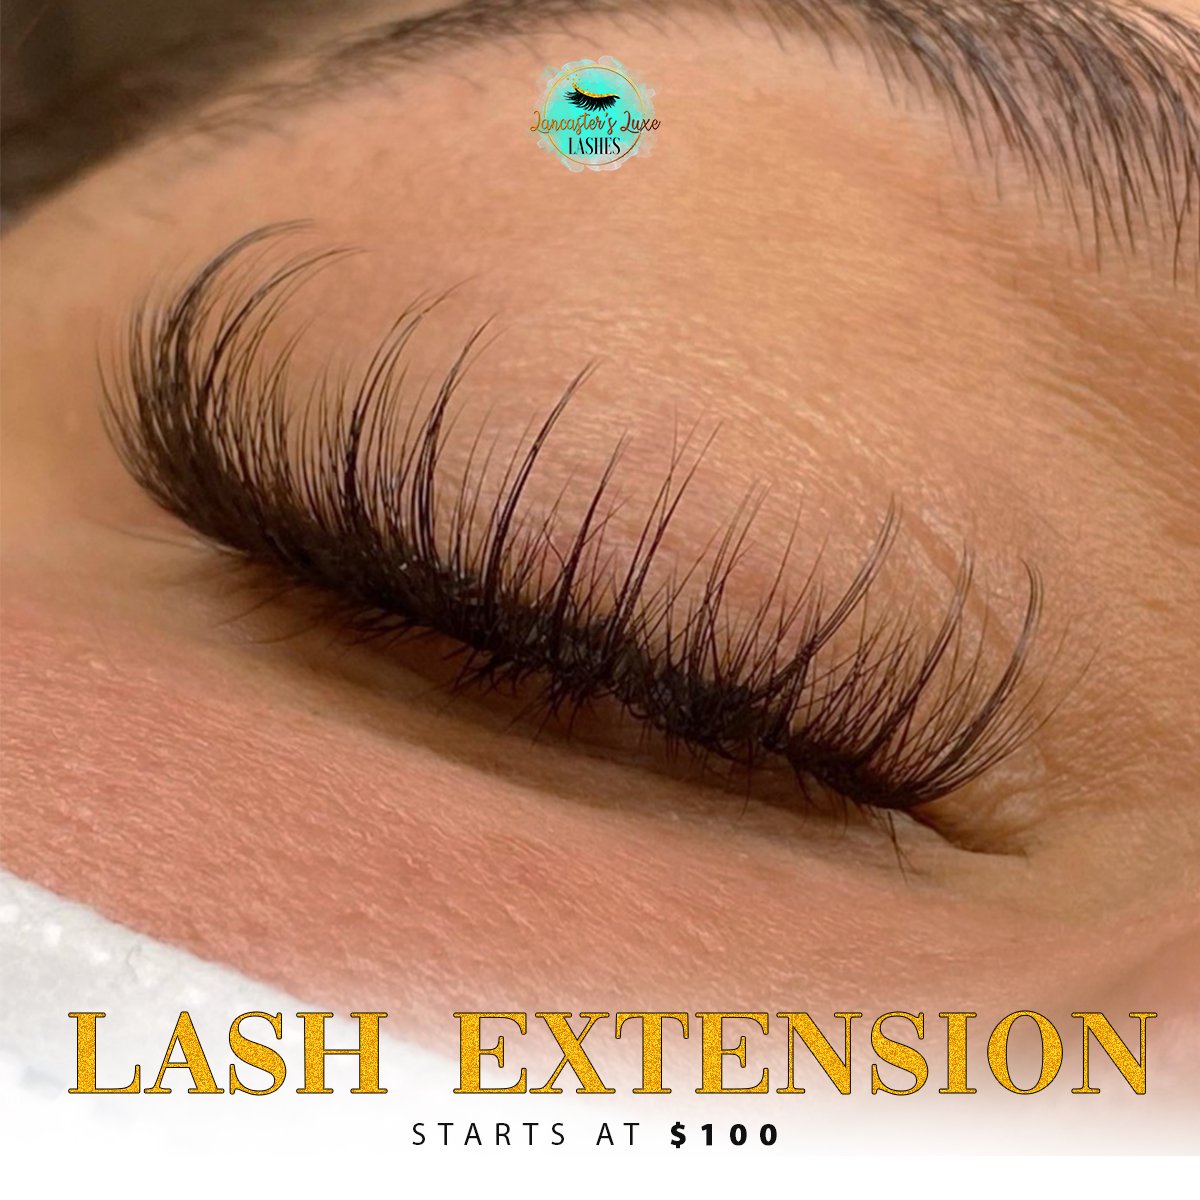 Tooth Gem — Lancaster's Luxe Lashes